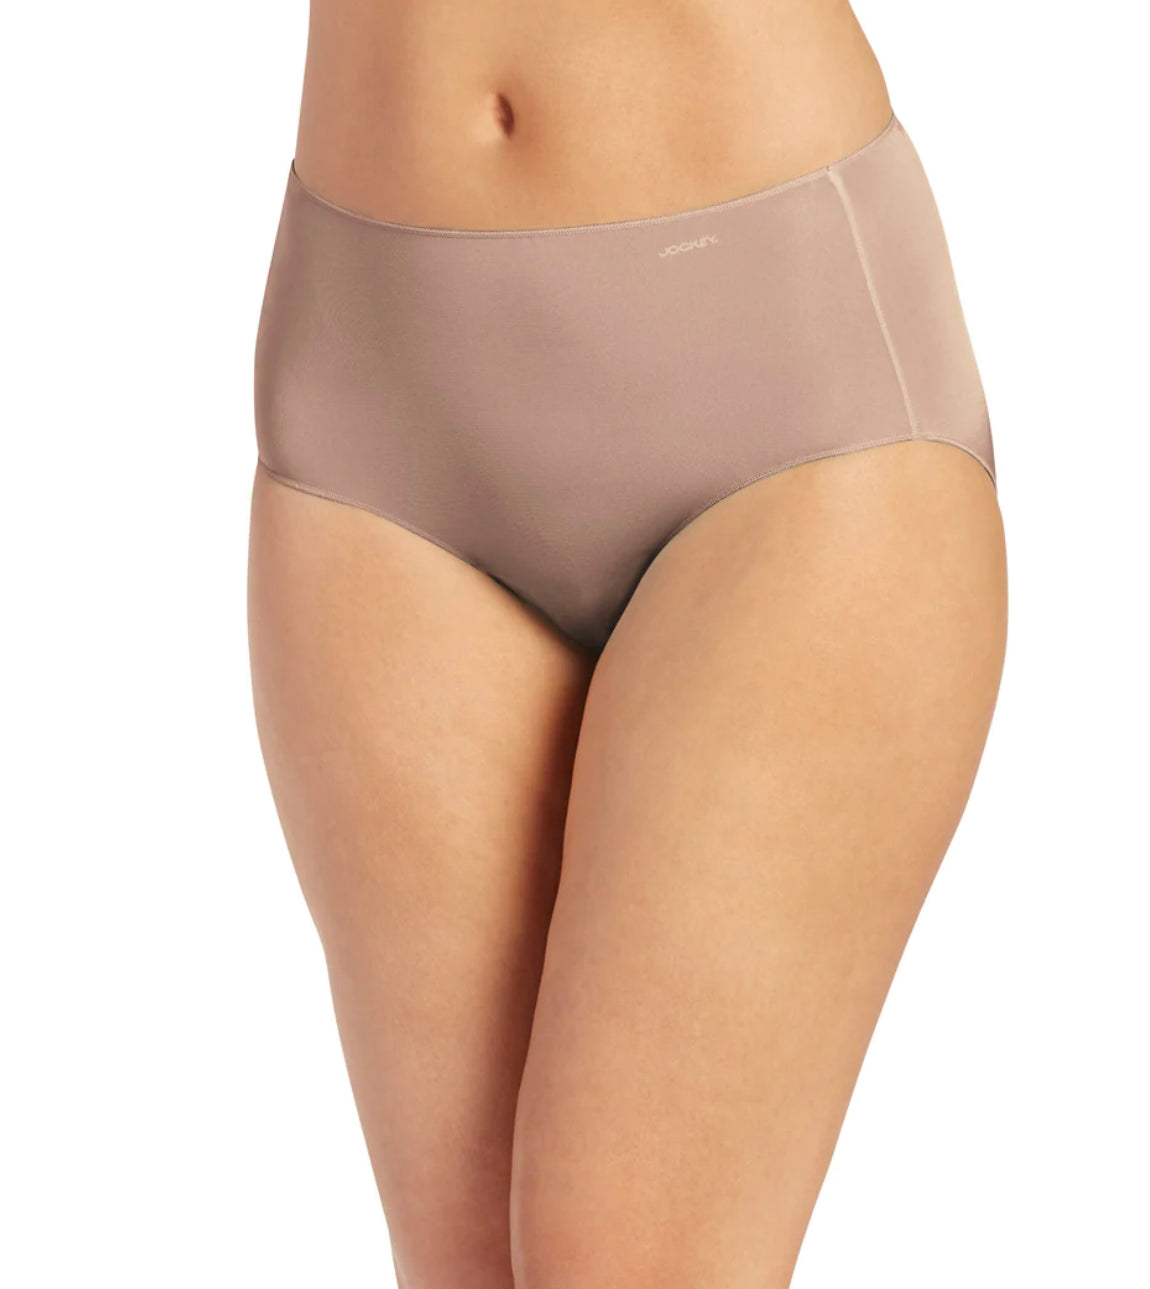 Jockey Women's Hip Brief (light) gives a smooth, silky feel with plenty of stretch. 